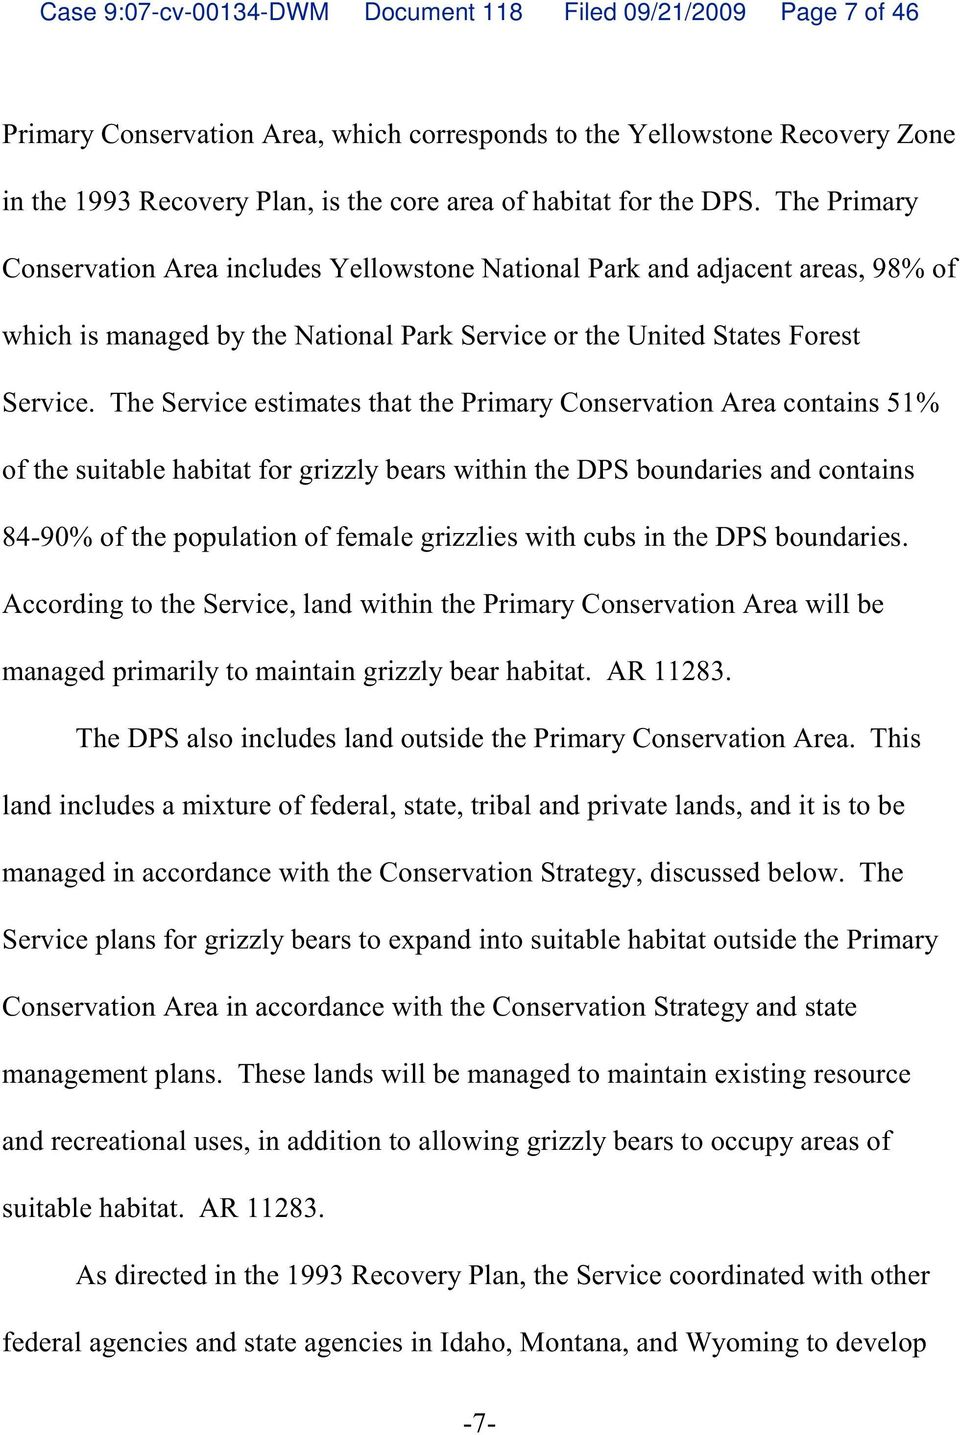 The Service estimates that the Primary Conservation Area contains 51% of the suitable habitat for grizzly bears within the DPS boundaries and contains 84-90% of the population of female grizzlies